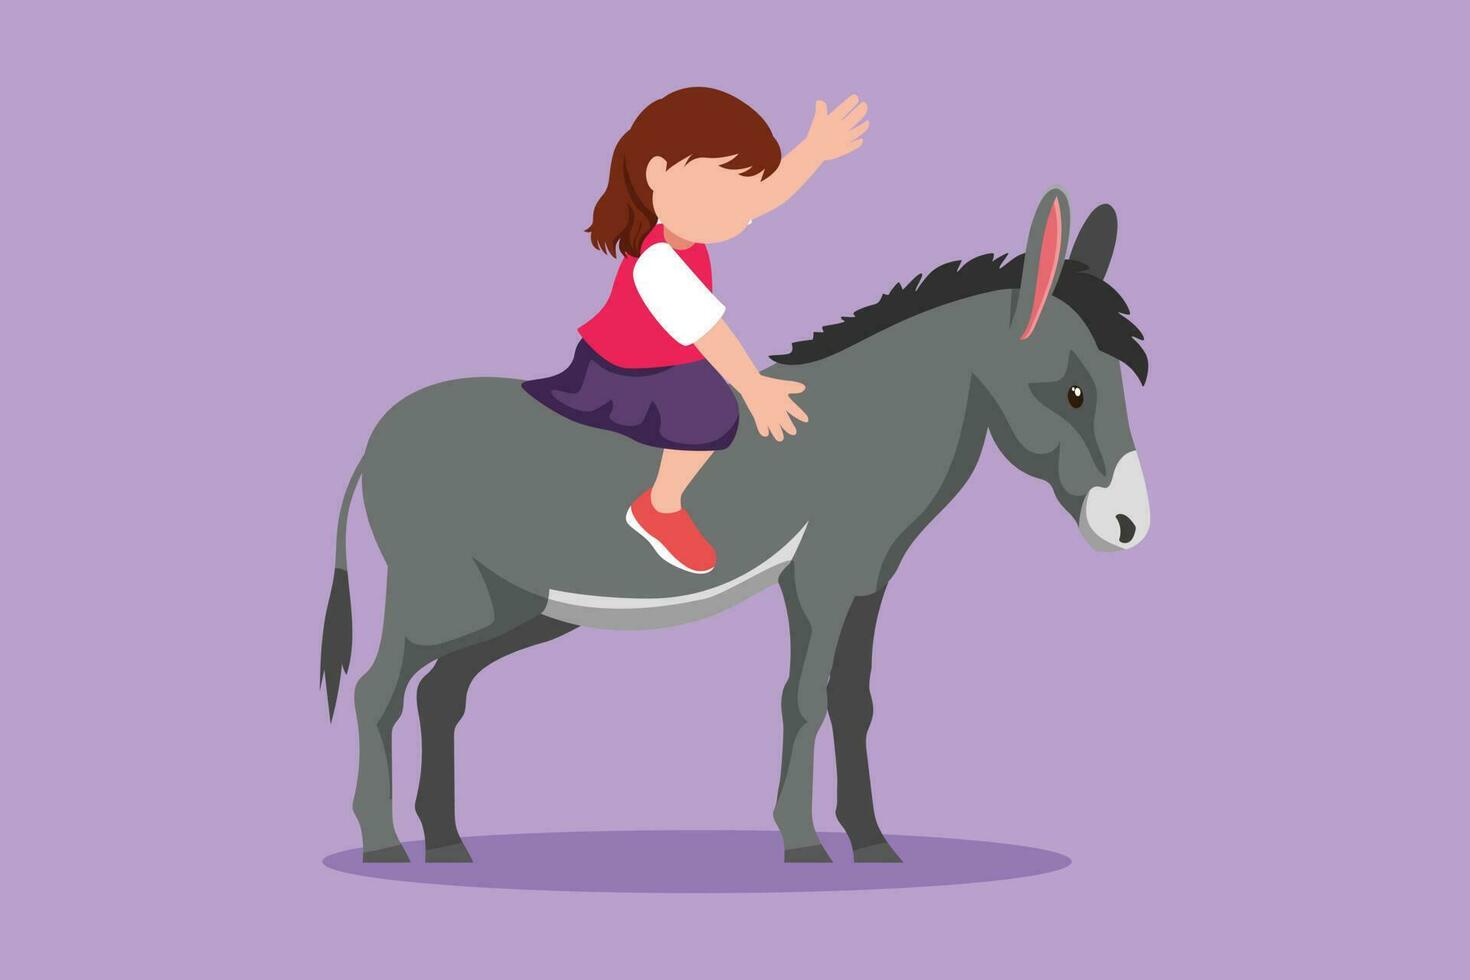 Cartoon flat style drawing happy little girl riding donkey at outdoor. Child sitting on back donkey with saddle in ranch park. Adorable kids learning to ride donkey. Graphic design vector illustration